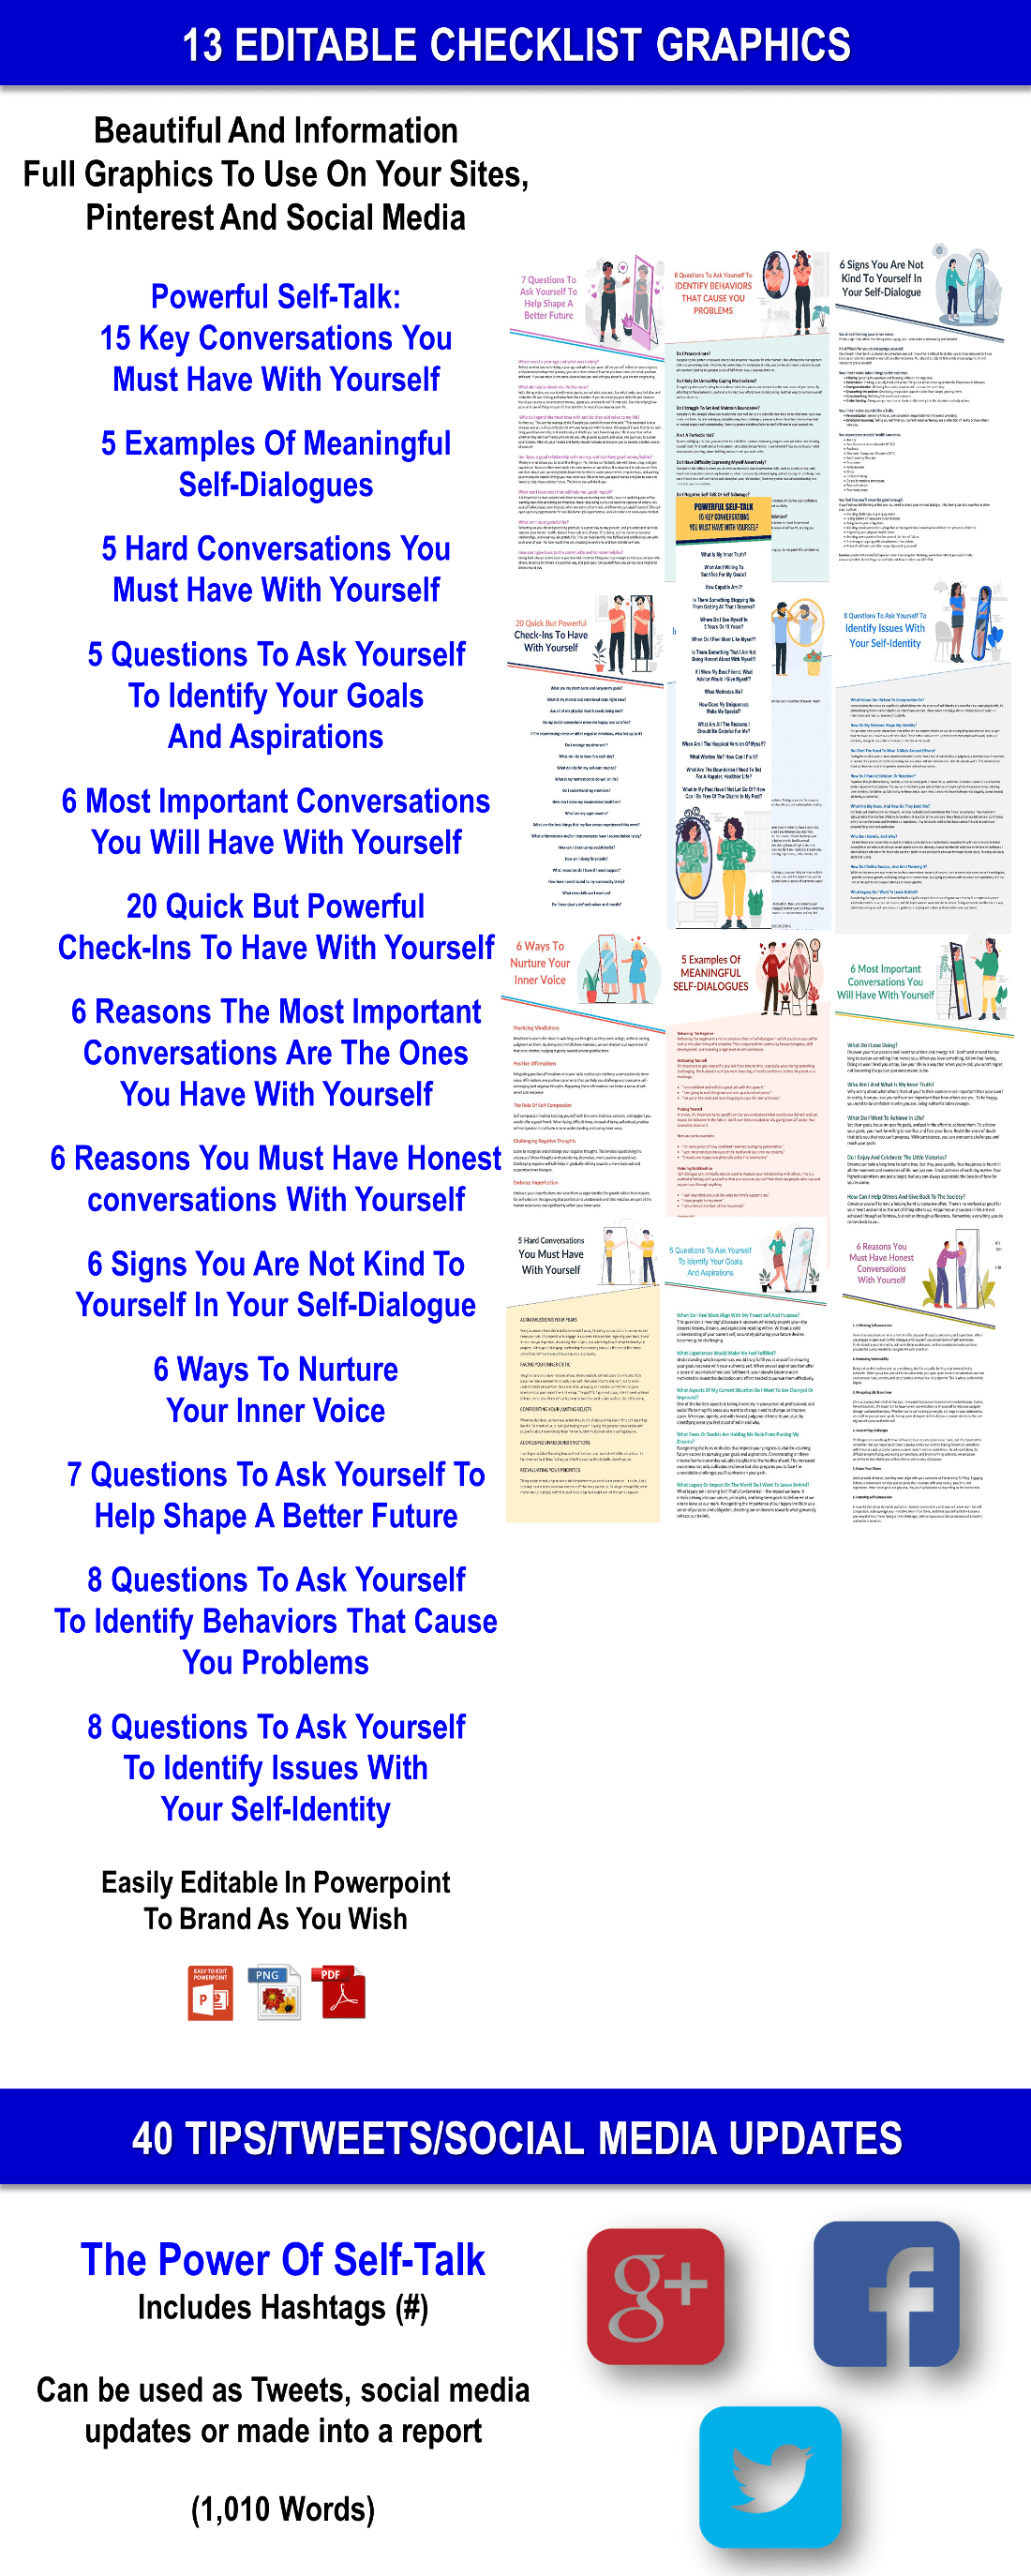 Power Self-Talk – 20 Key Conversations You Must Have With Yourself Content Pack with PLR Rights